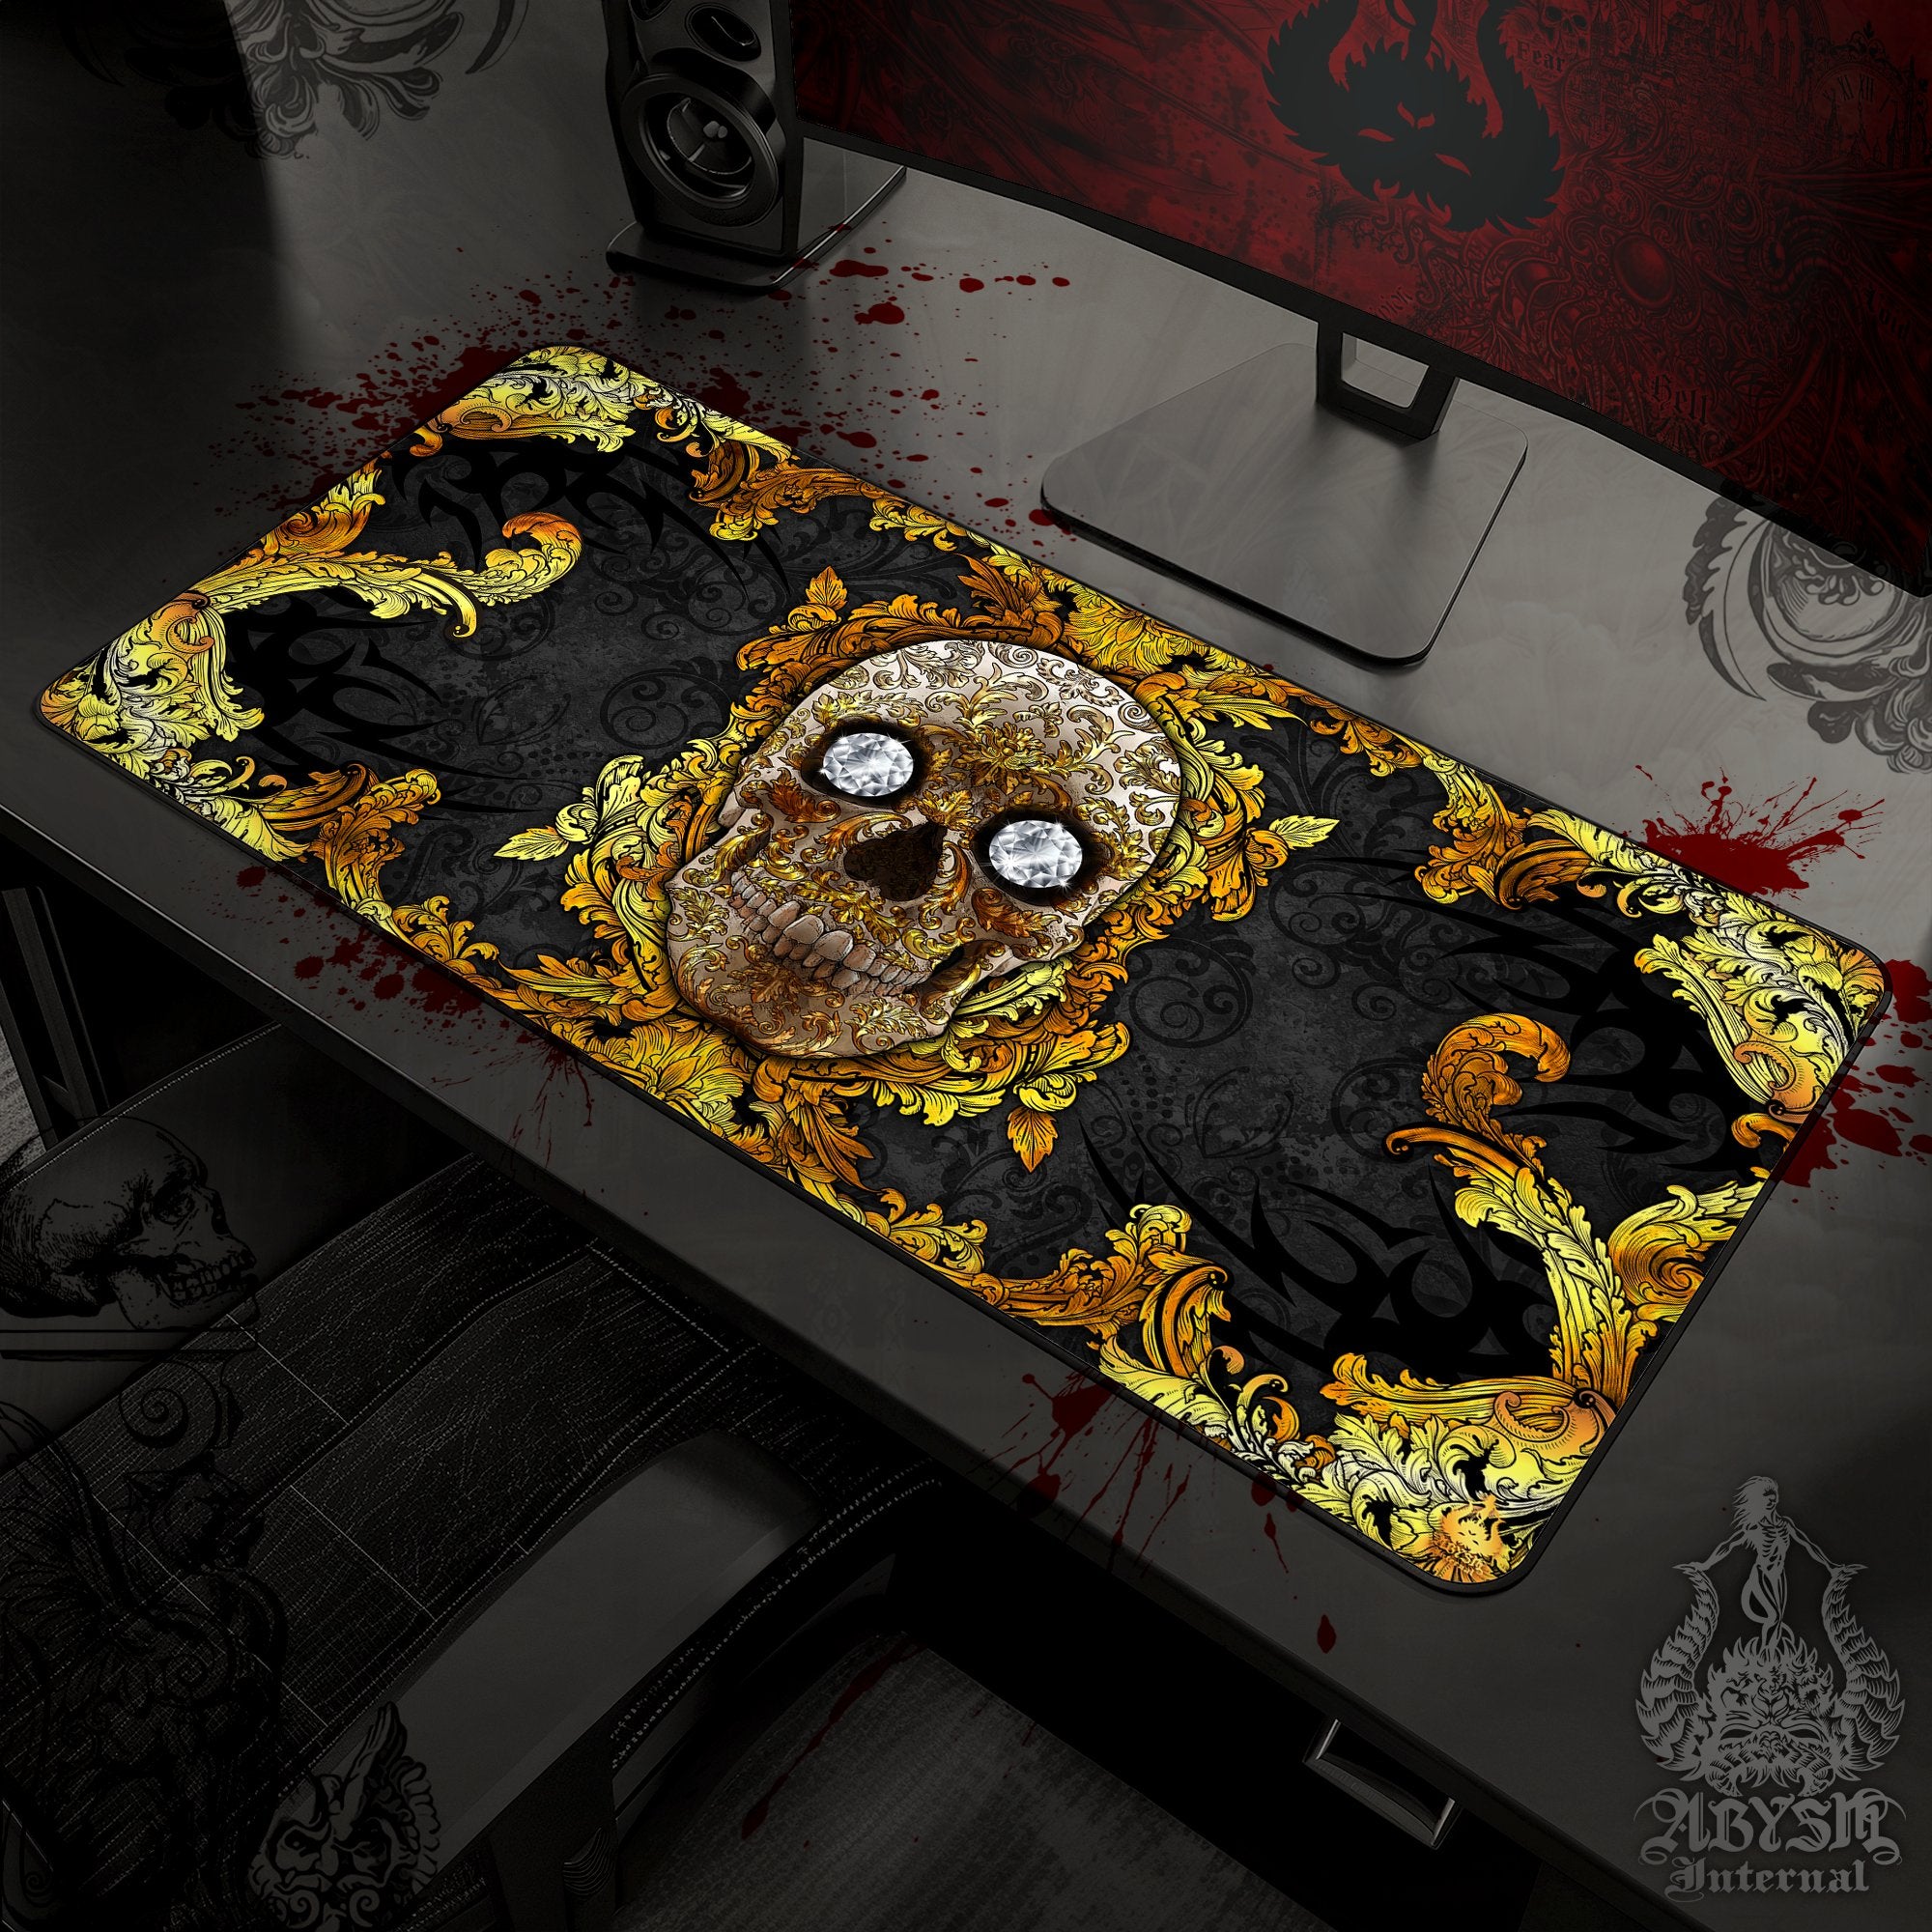 Gold Skull Workpad, Baroque Desk Mat, Ornamented Gaming Mouse Pad, Vintage Table Protector Cover, Art Print - Black - Abysm Internal